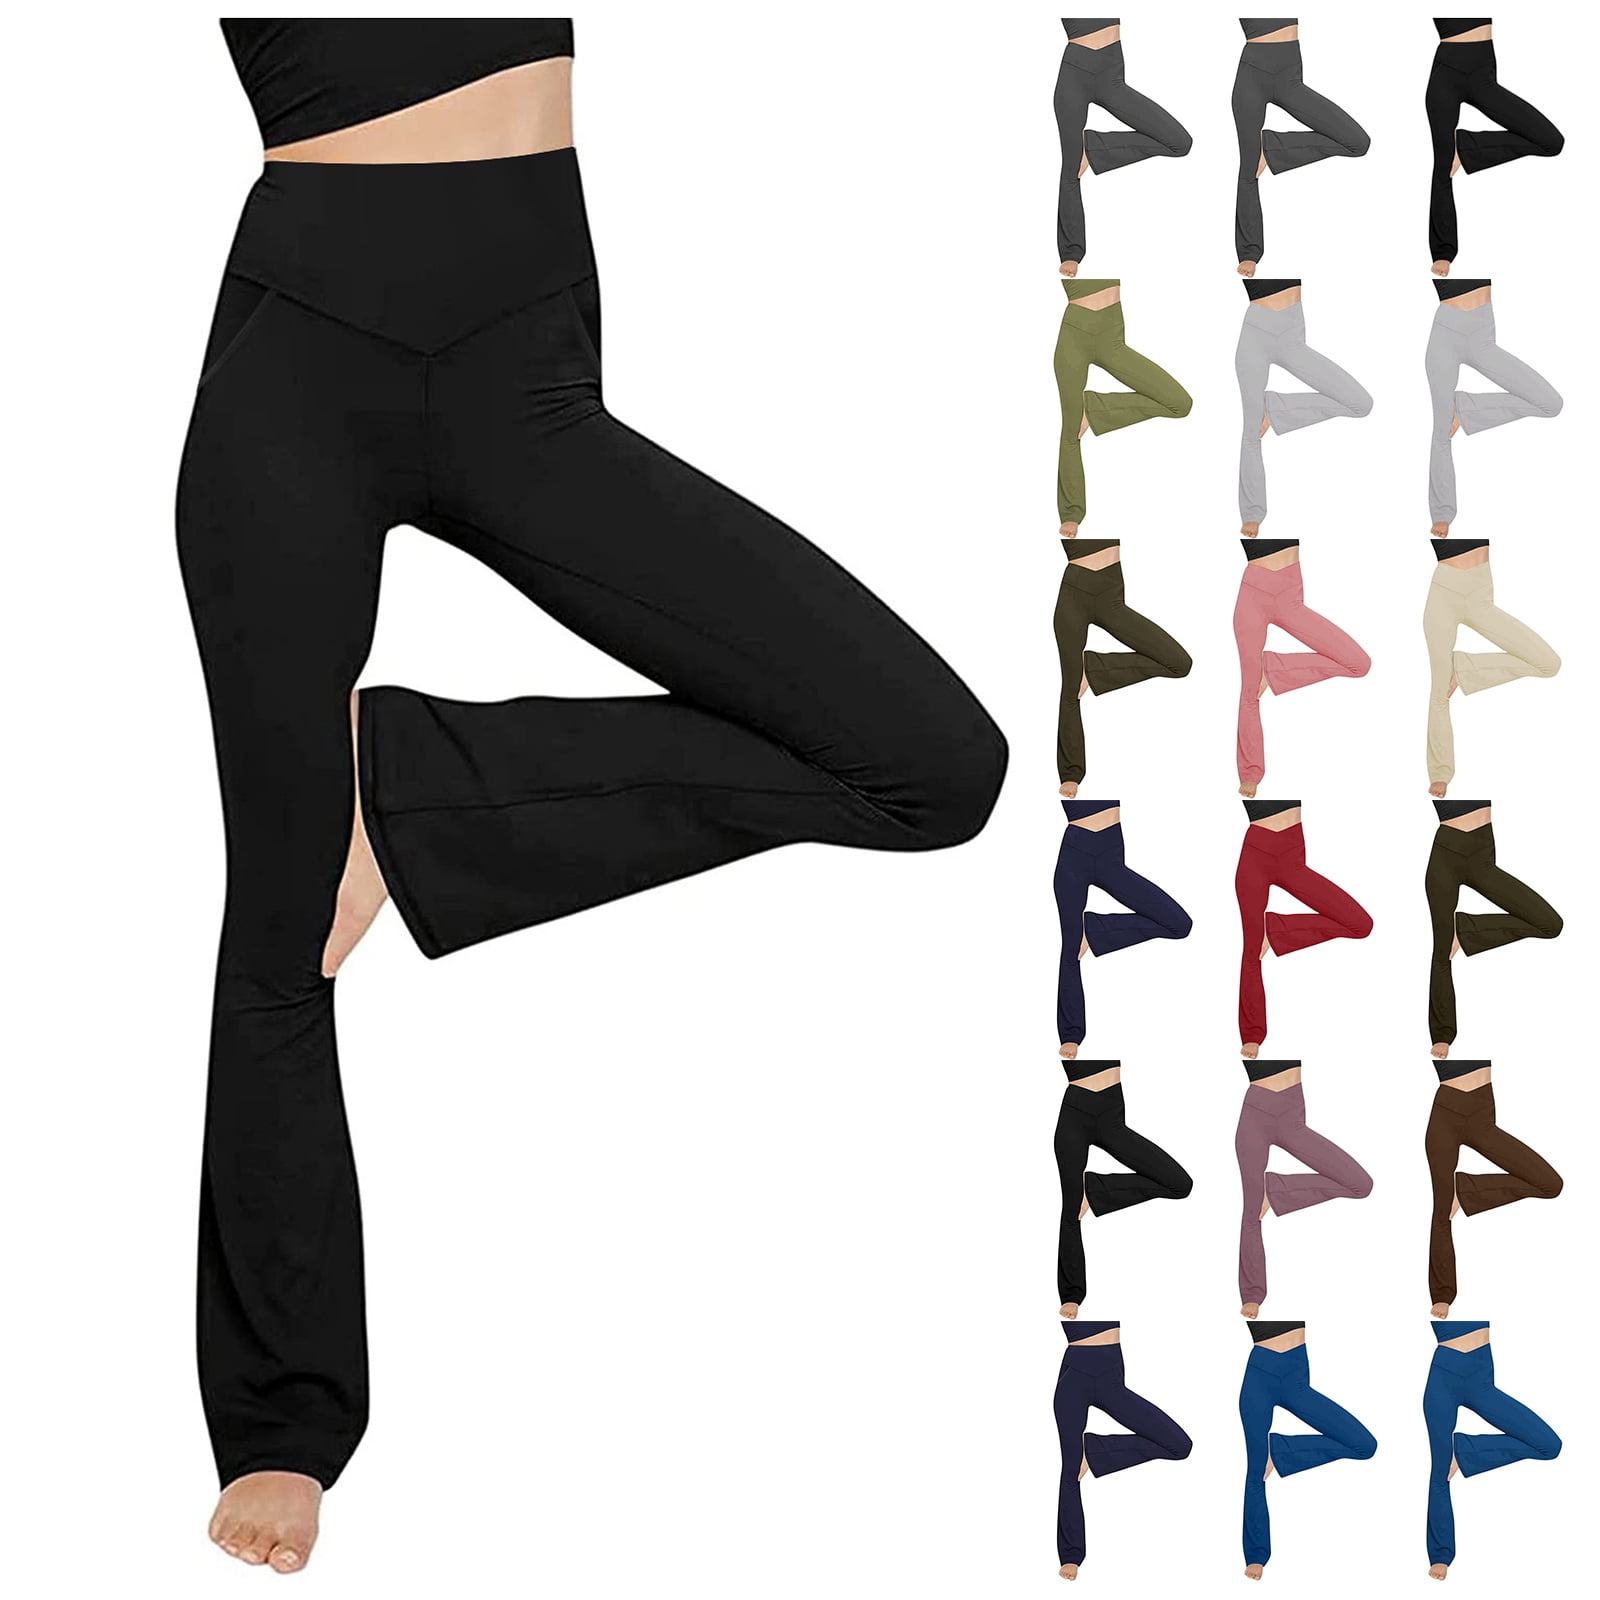 Don't Miss Out! Flare Leggings, Flared Leggings, Workout Pants Women,  Straight Leg Sweatpants for Women, Soft Leggings for Women, Flare Leggings